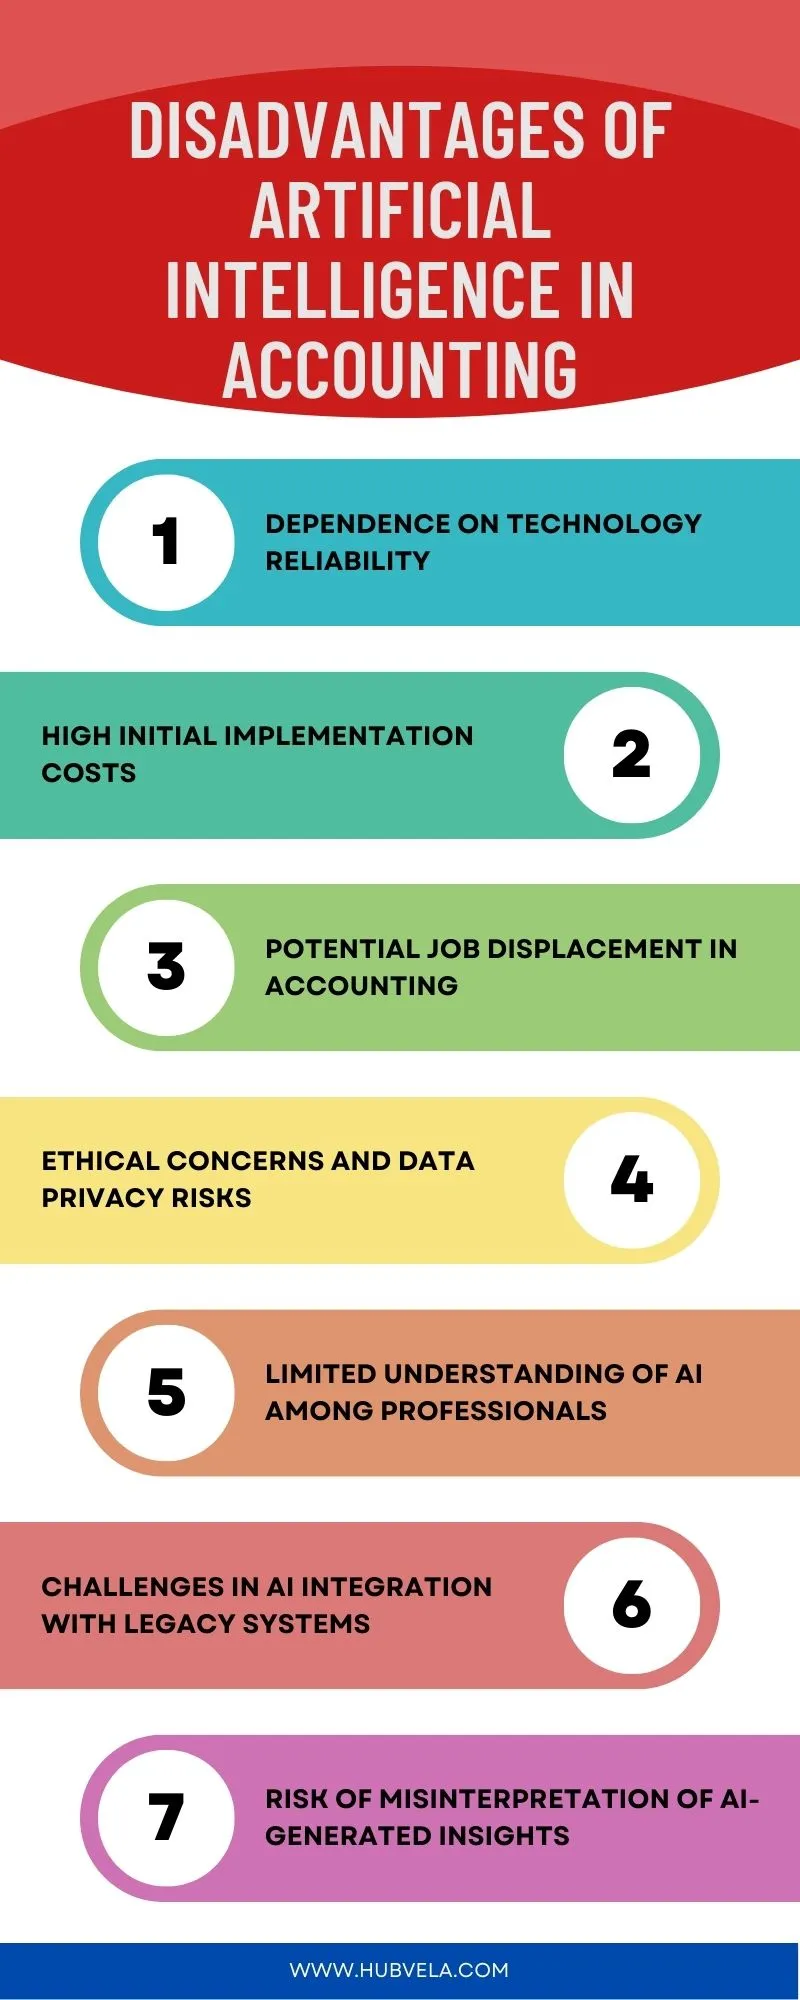 Disadvantages of Artificial Intelligence in Accounting Infographic